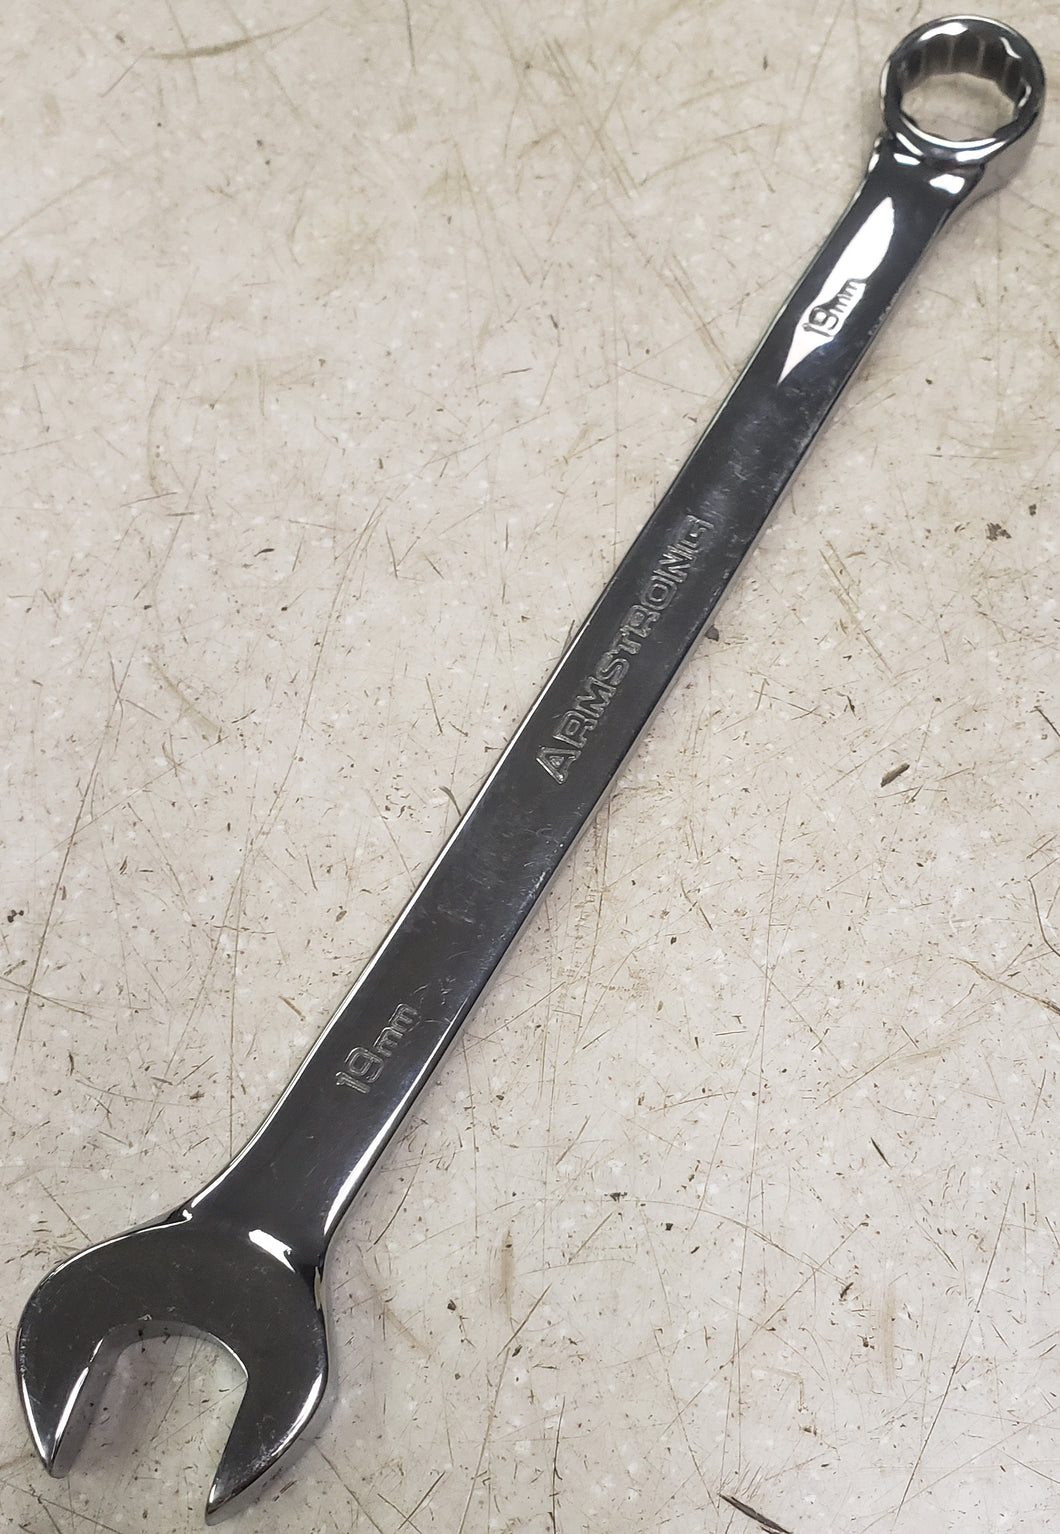 New Armstrong 52-219 19mm 12Pt Combination Wrench